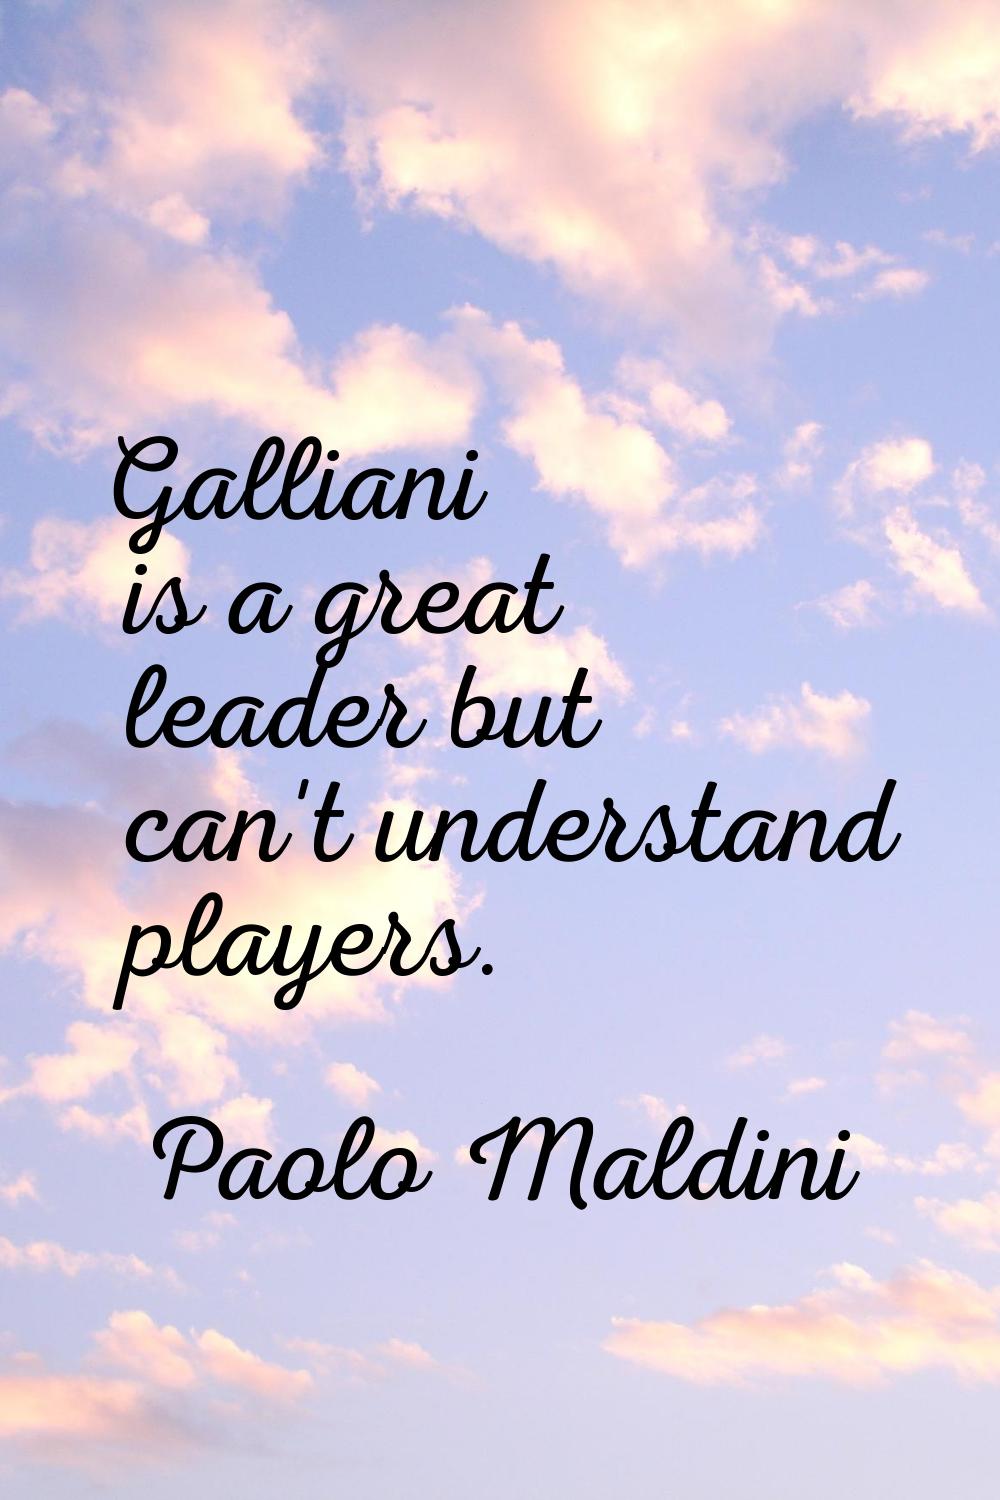 Galliani is a great leader but can't understand players.